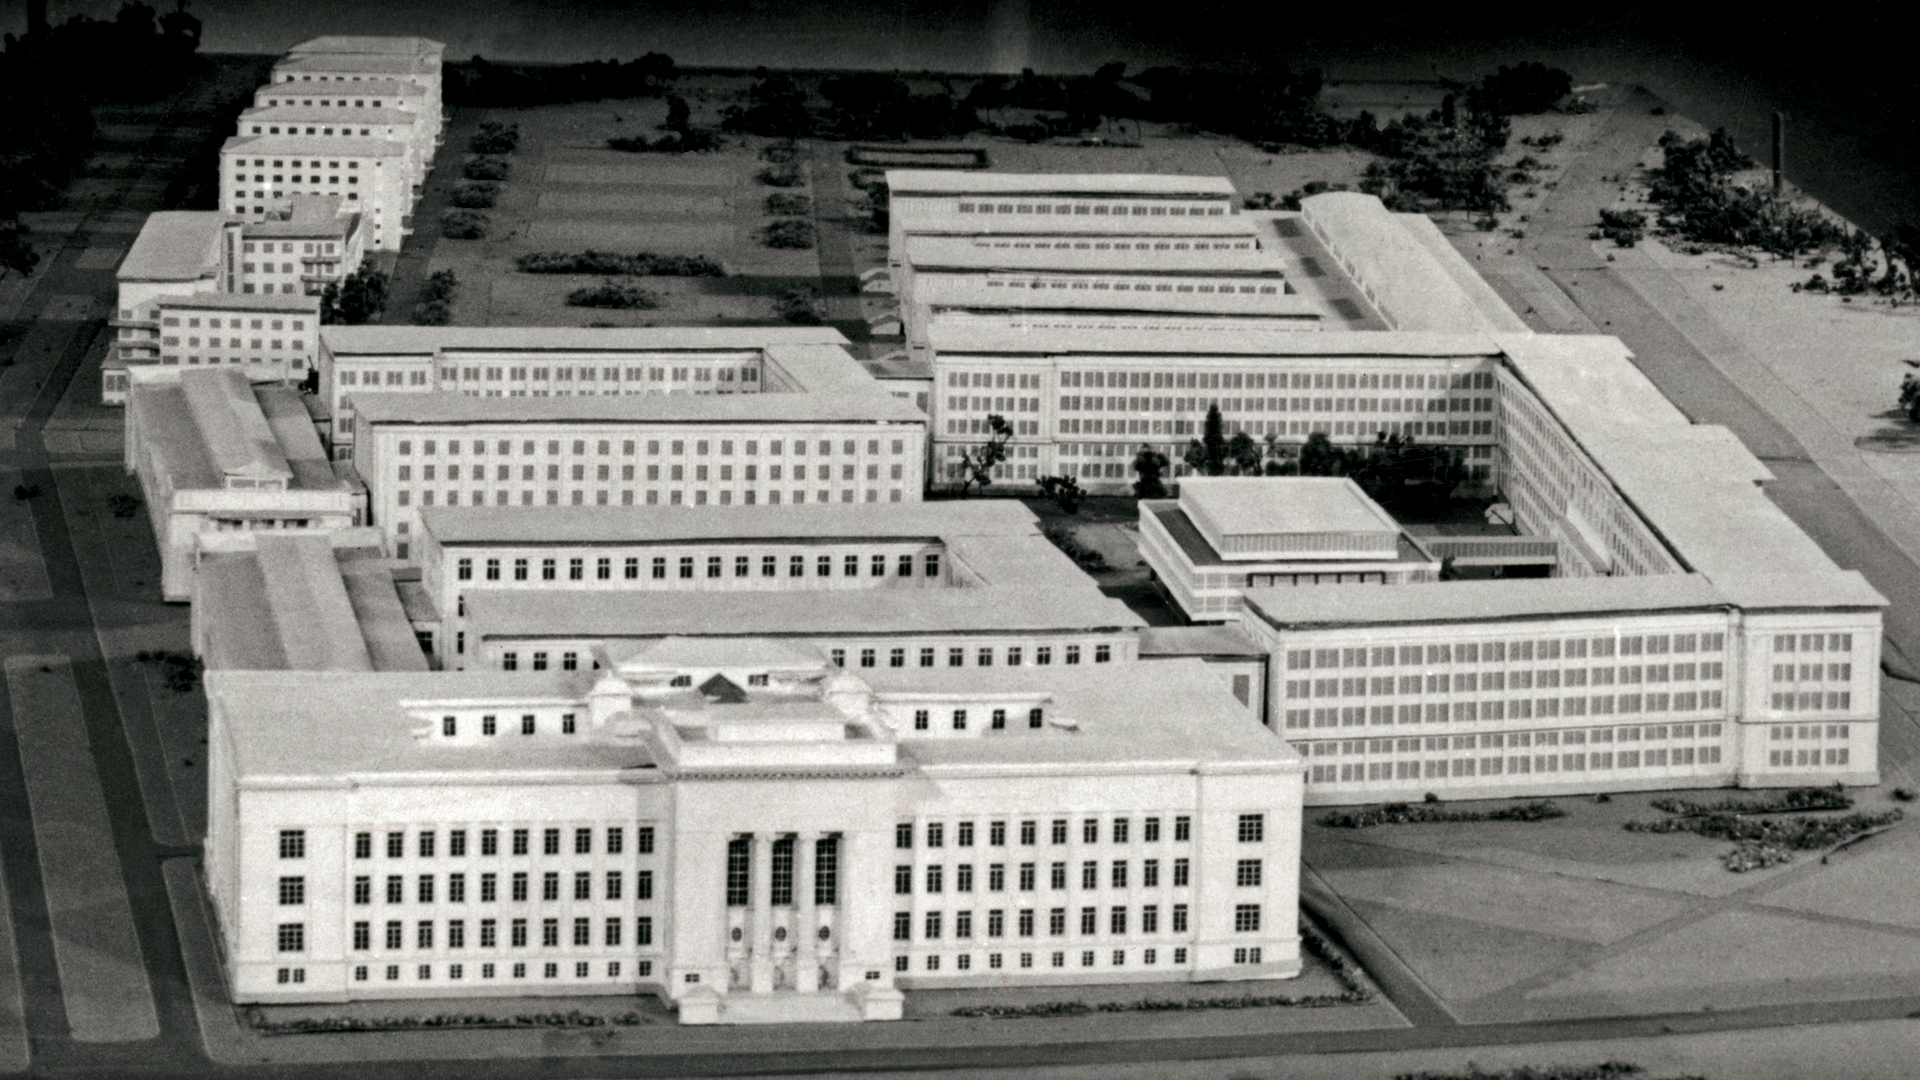 A black-and-white photo of a miniature model of the AGH UST Campus.